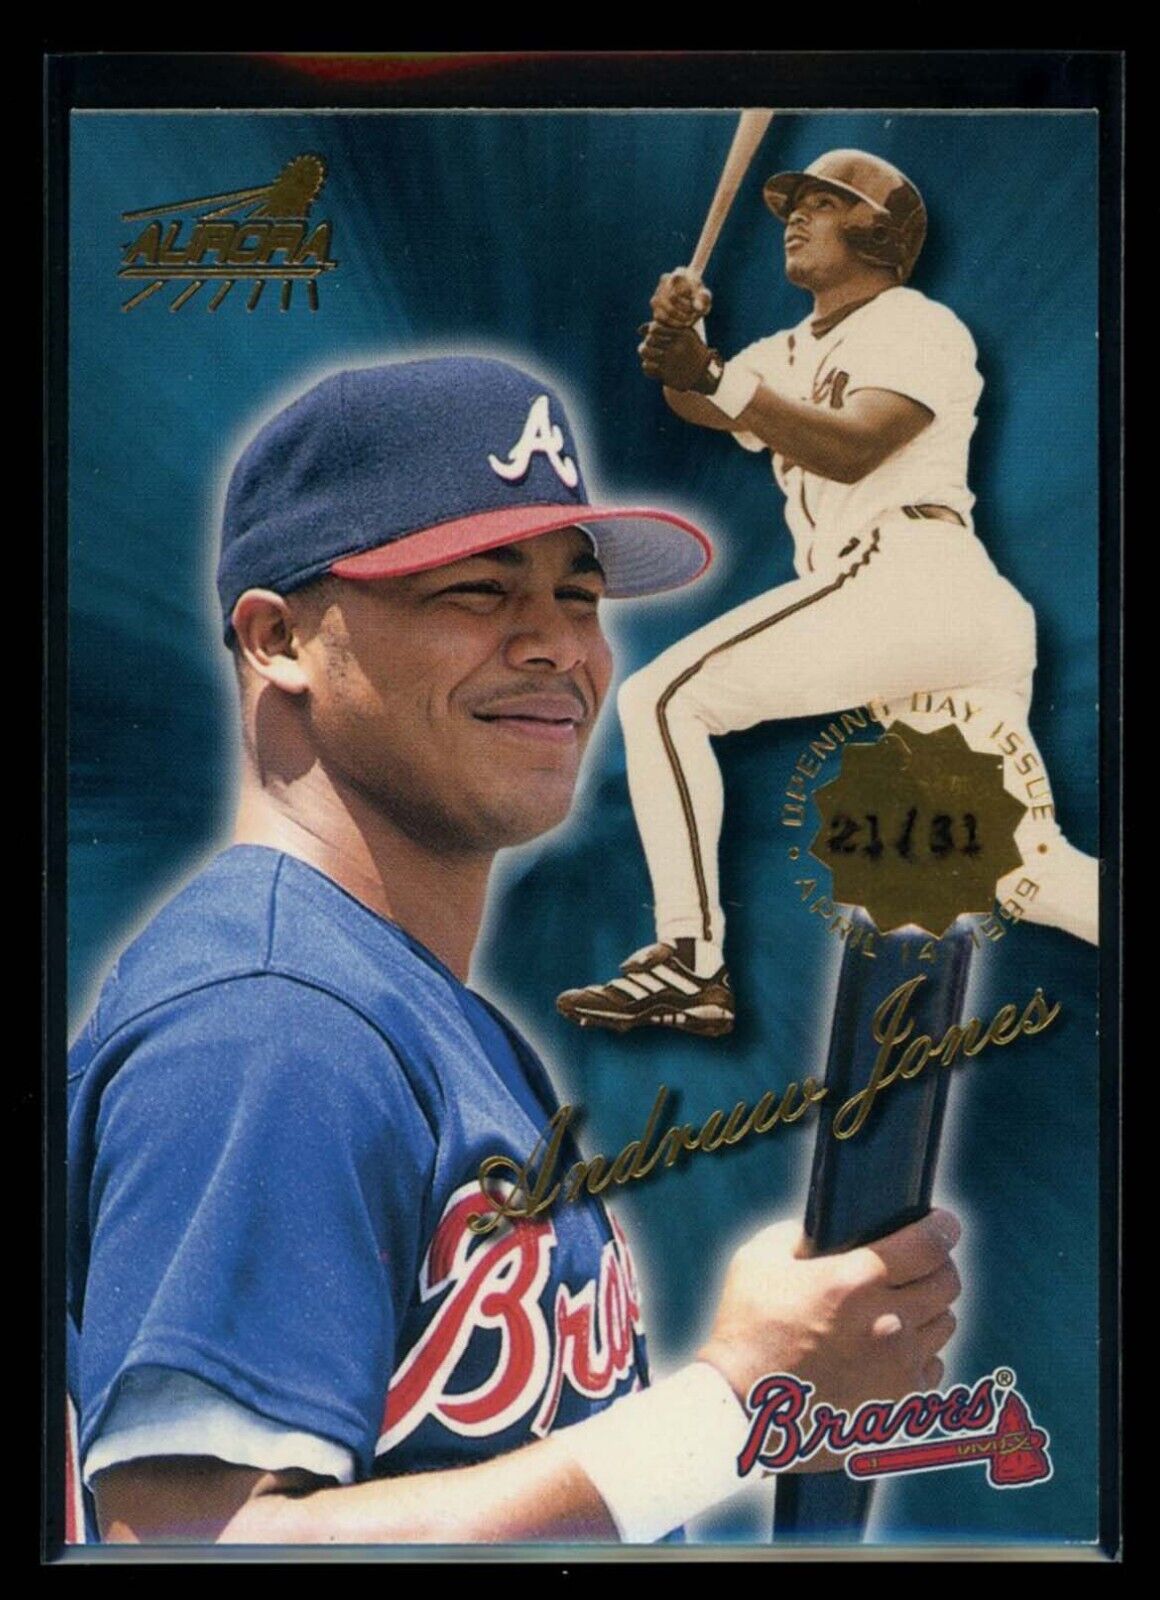 ANDRUW JONES 1999 Pacific Aurora Opening Day Issue #16 21/31 Baseball Parallel Serial Numbered - Hobby Gems